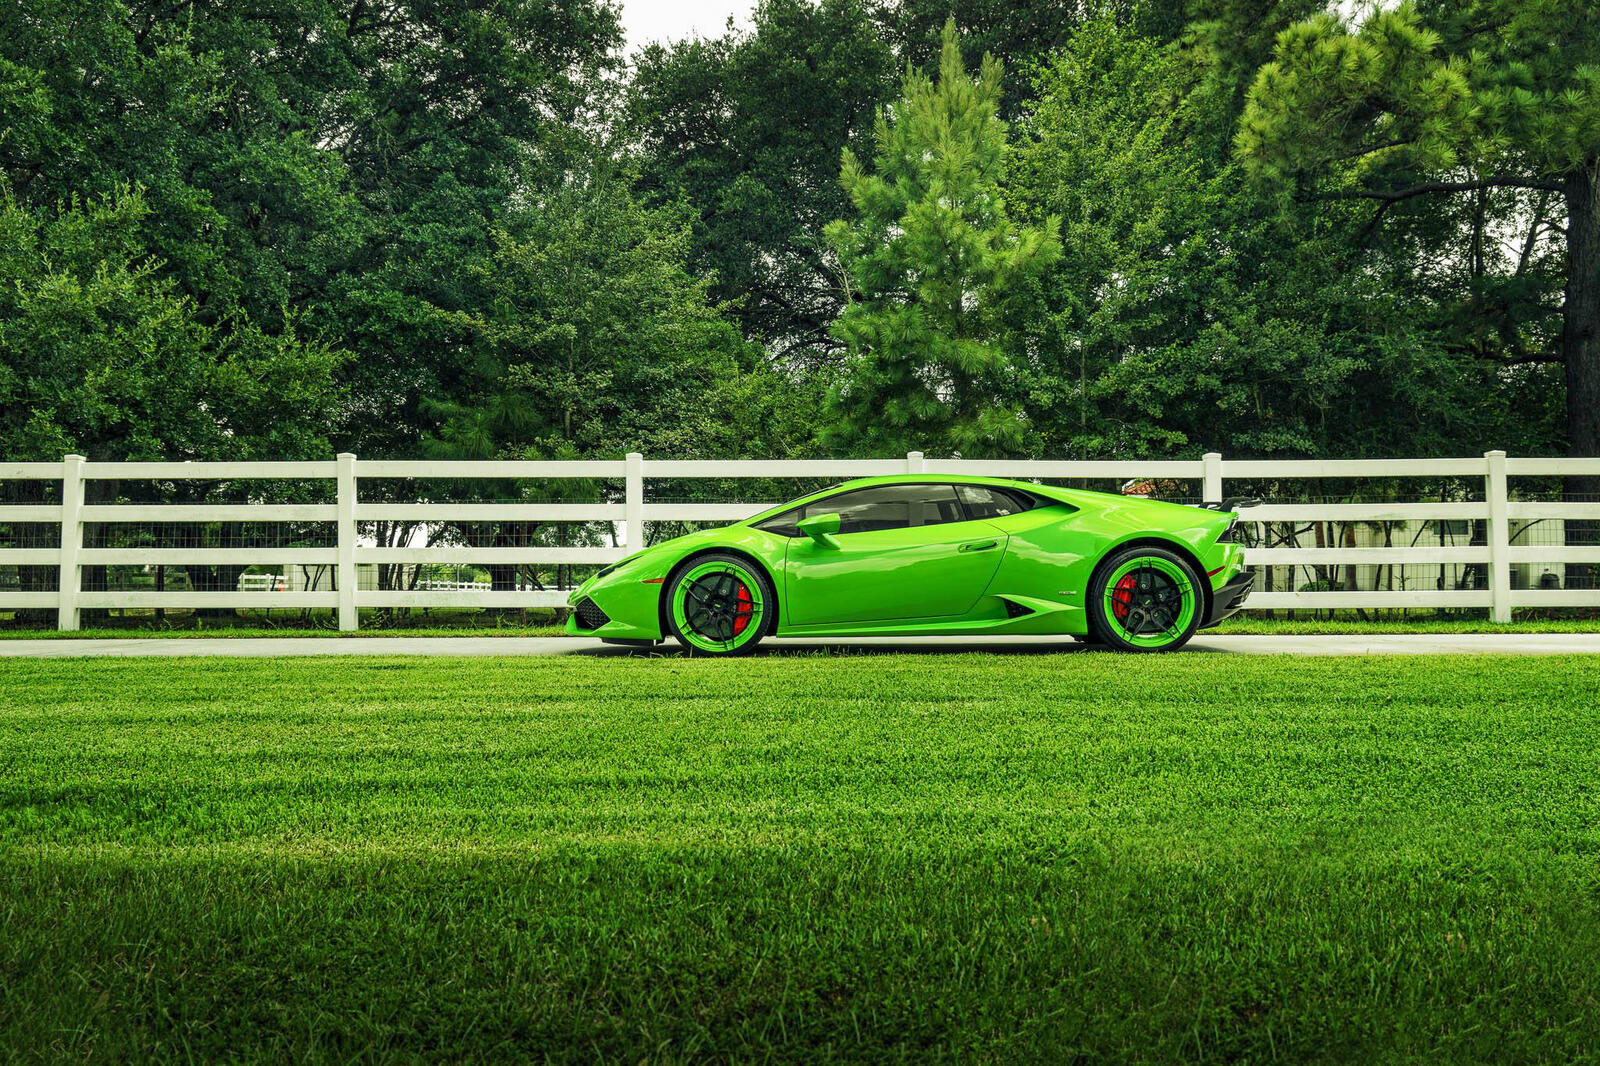 Free photo Lamborghini Huracan in green color on the background of a green field